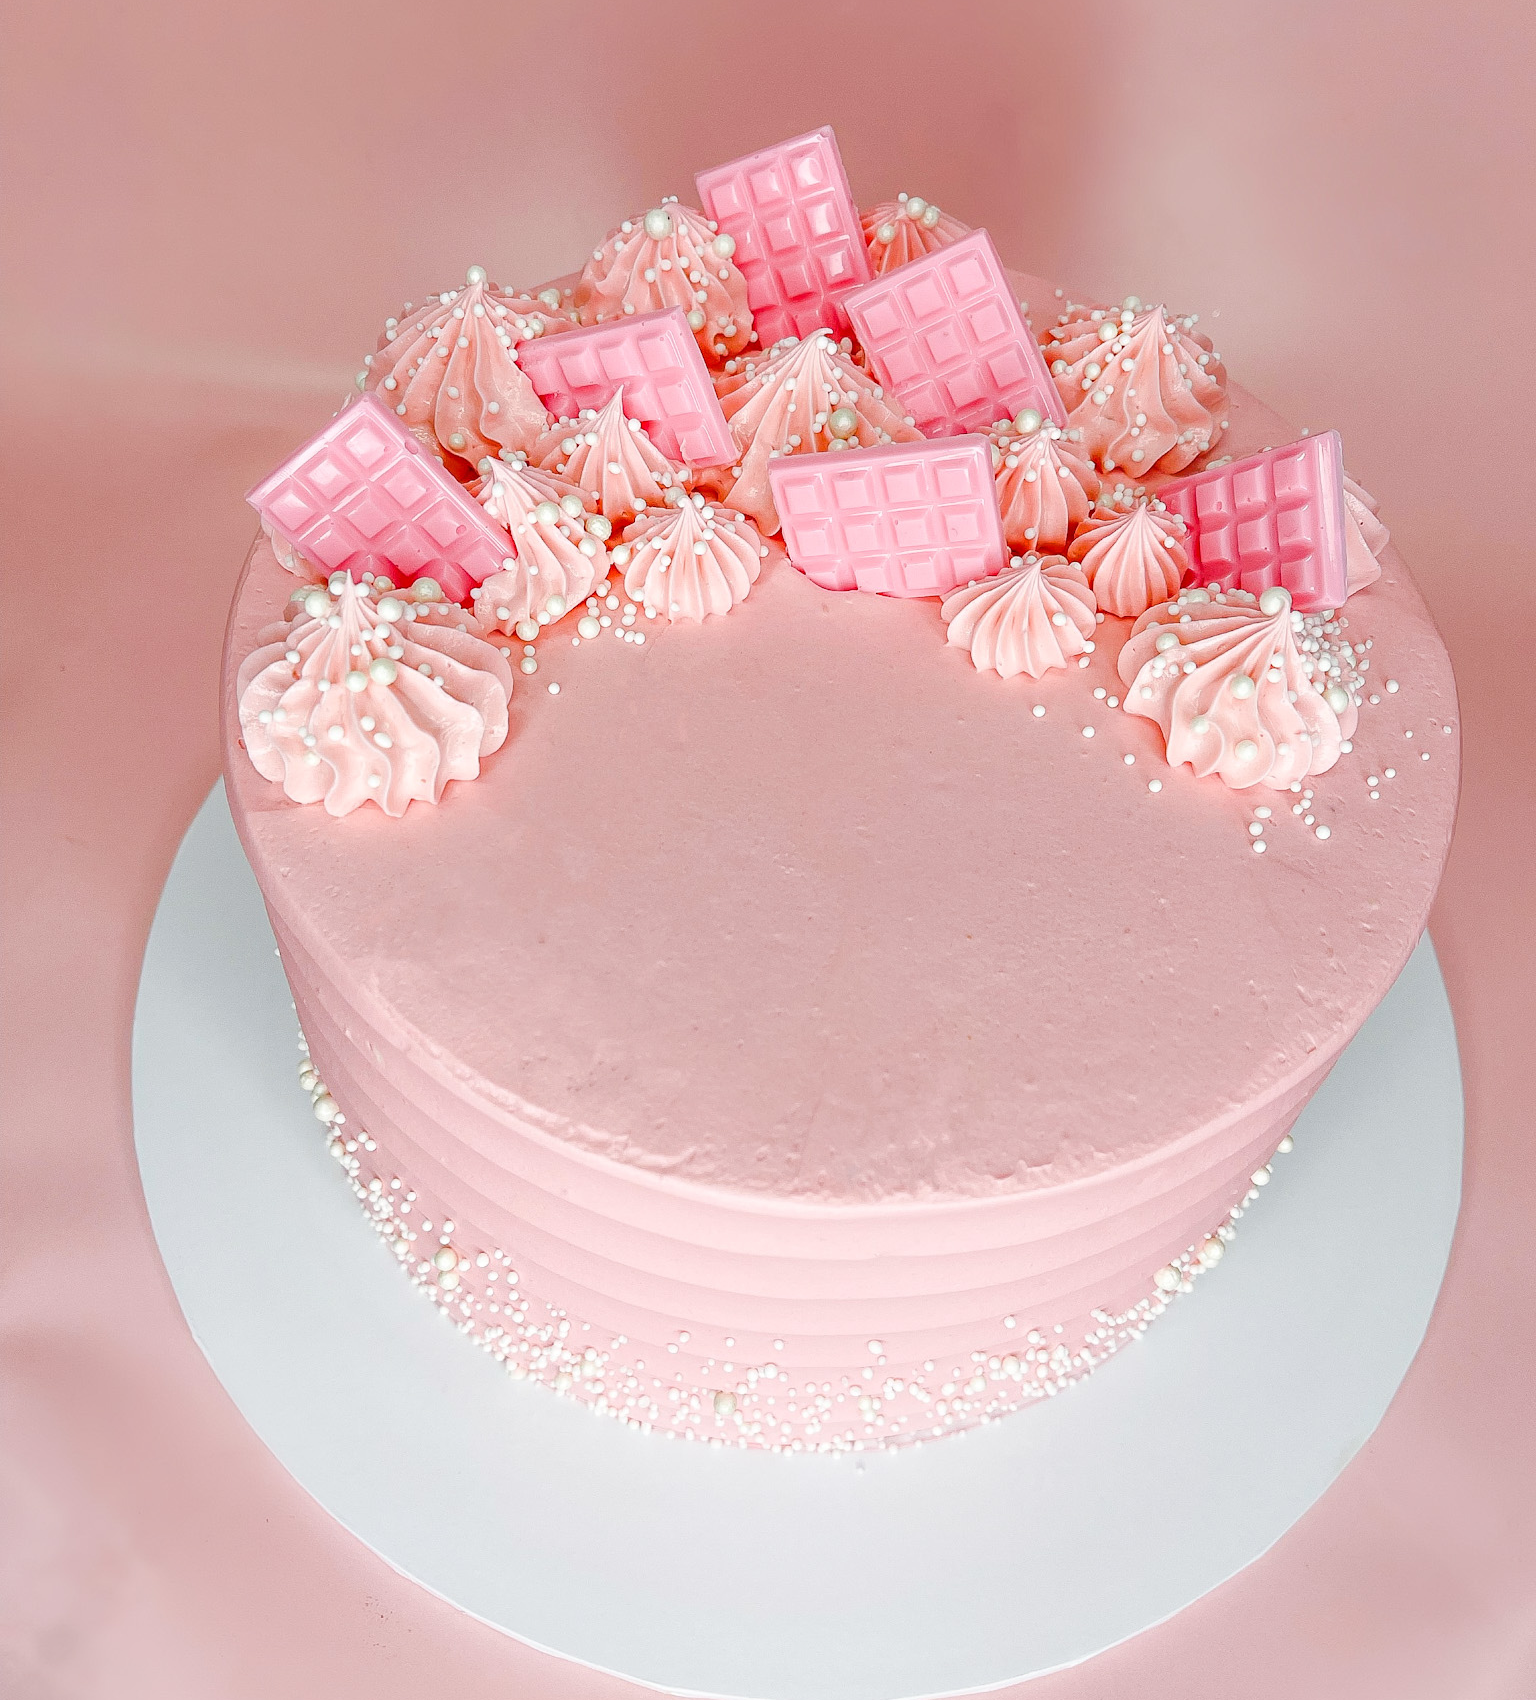 Pink Ombre Cake for Baby's 1st Birthday - Dessert First